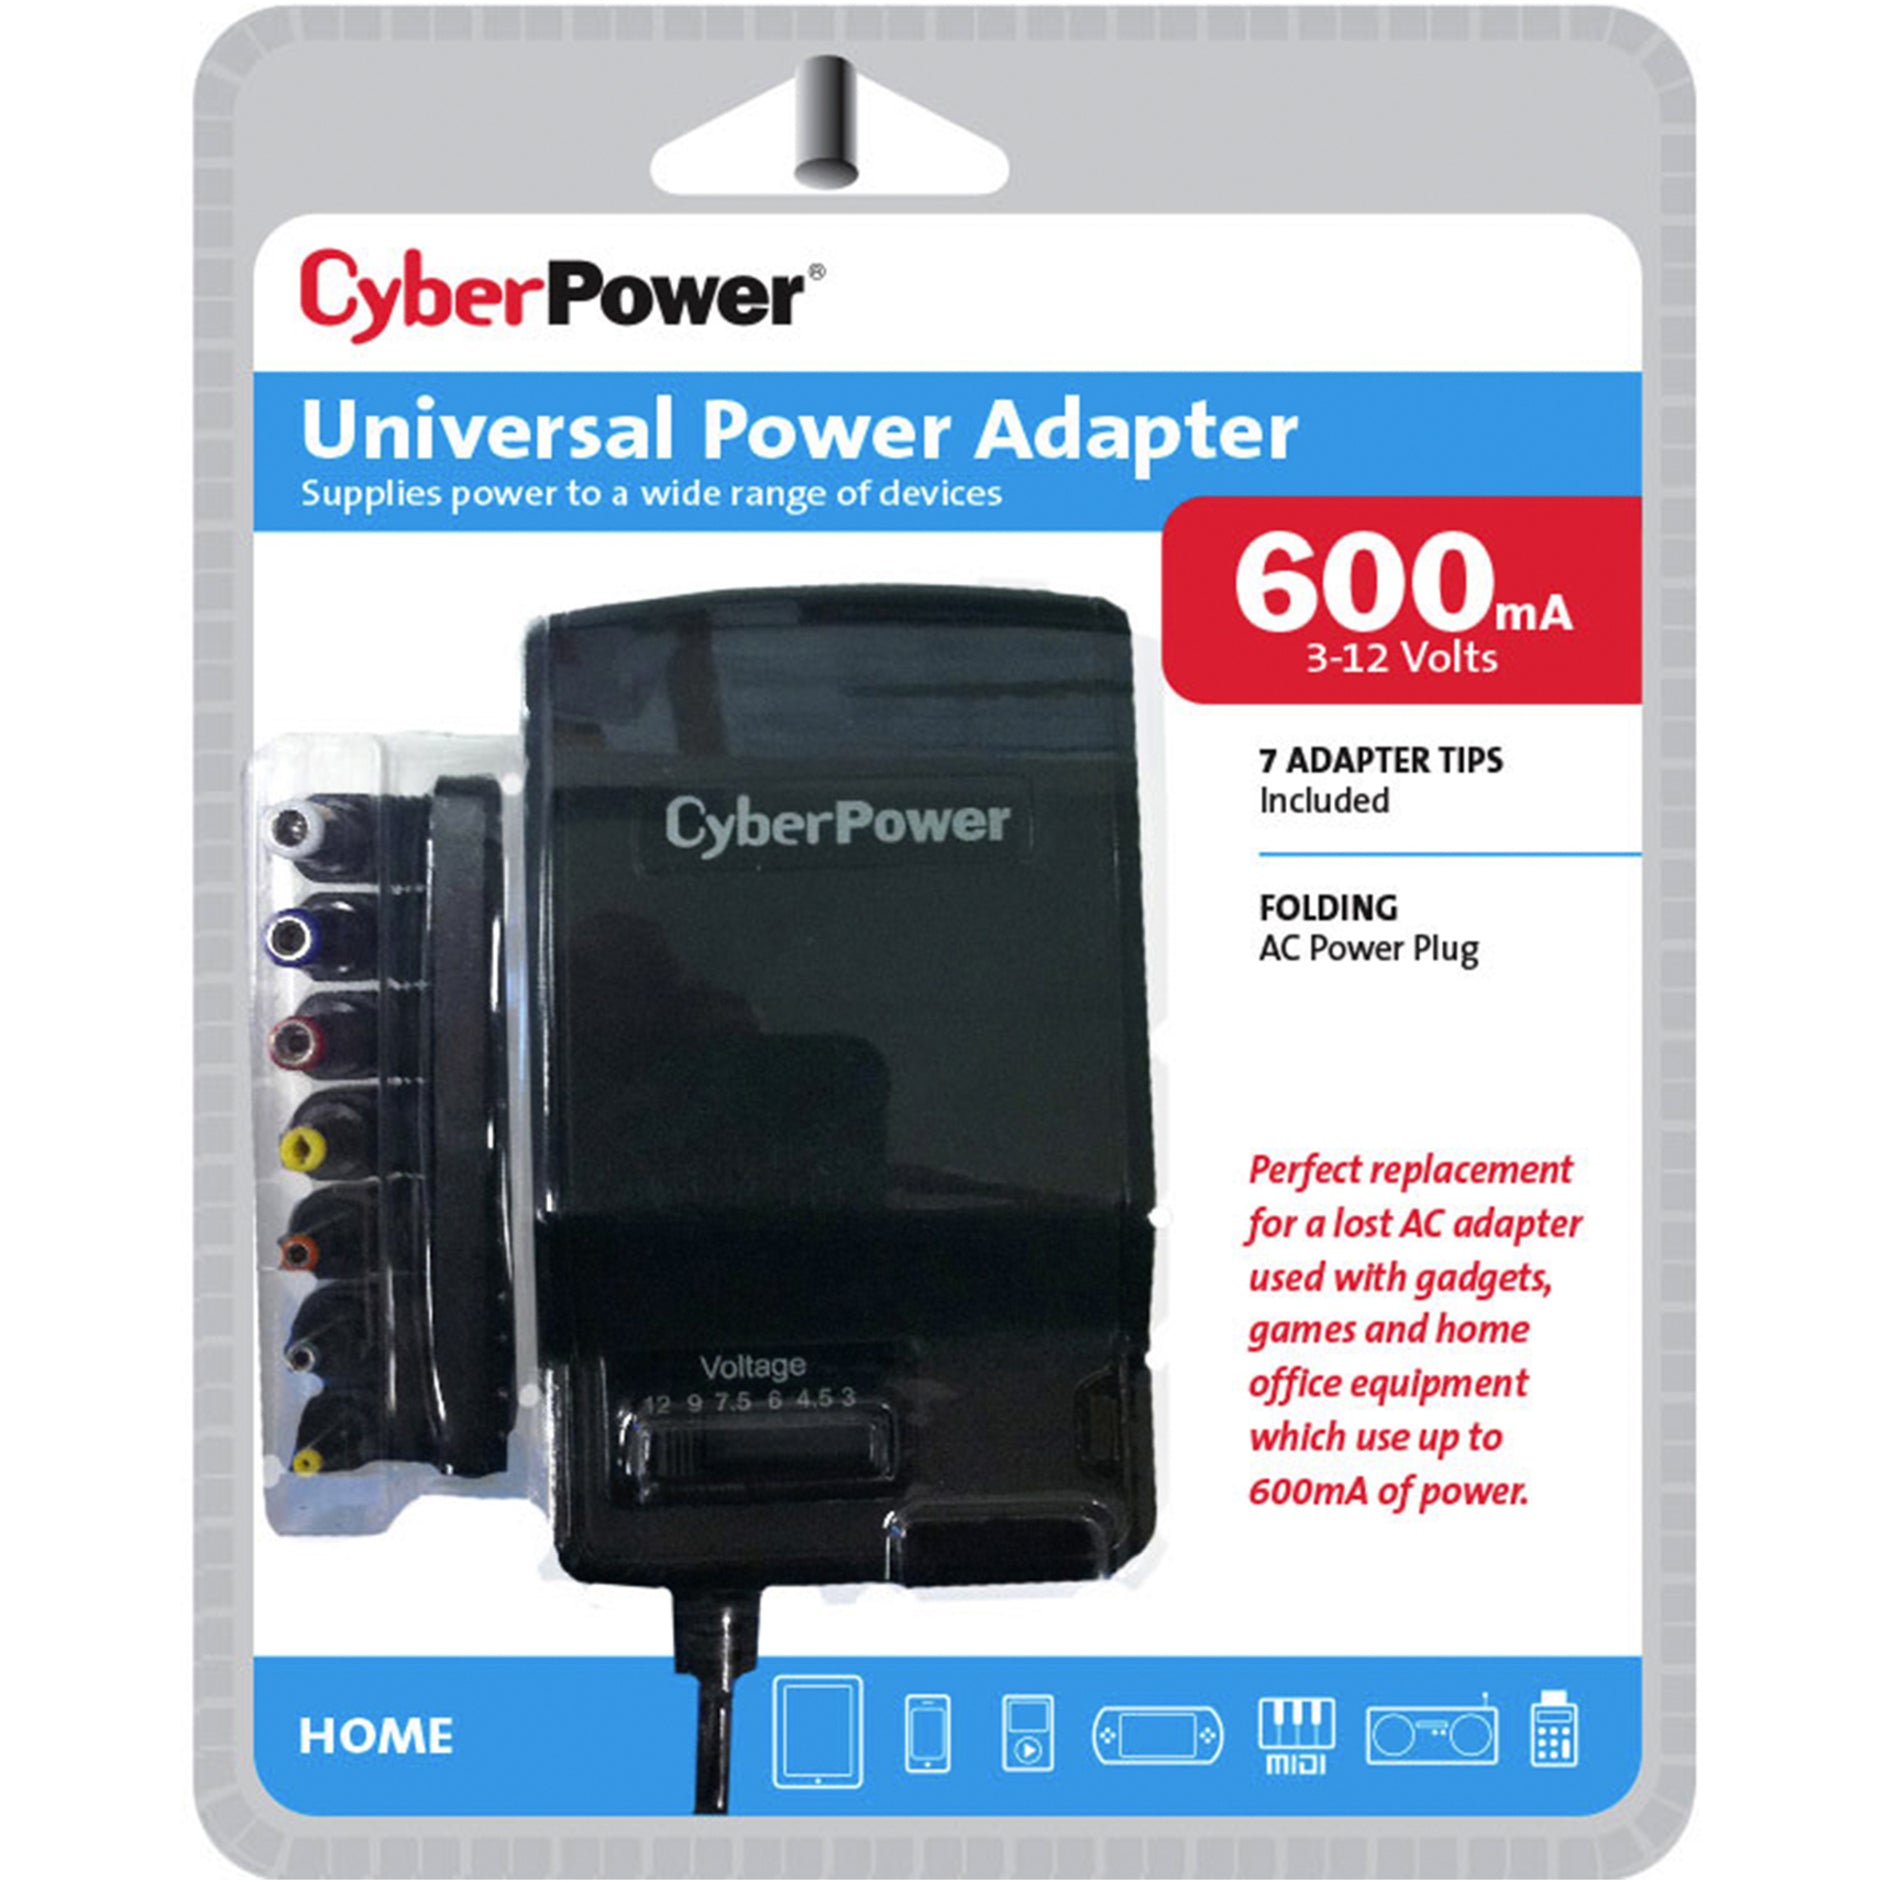 CyberPower CPUAC600 Universal Power Adapter 3-12V 600mA and AC Power Plug, Multiple Tips, Slim Line Design